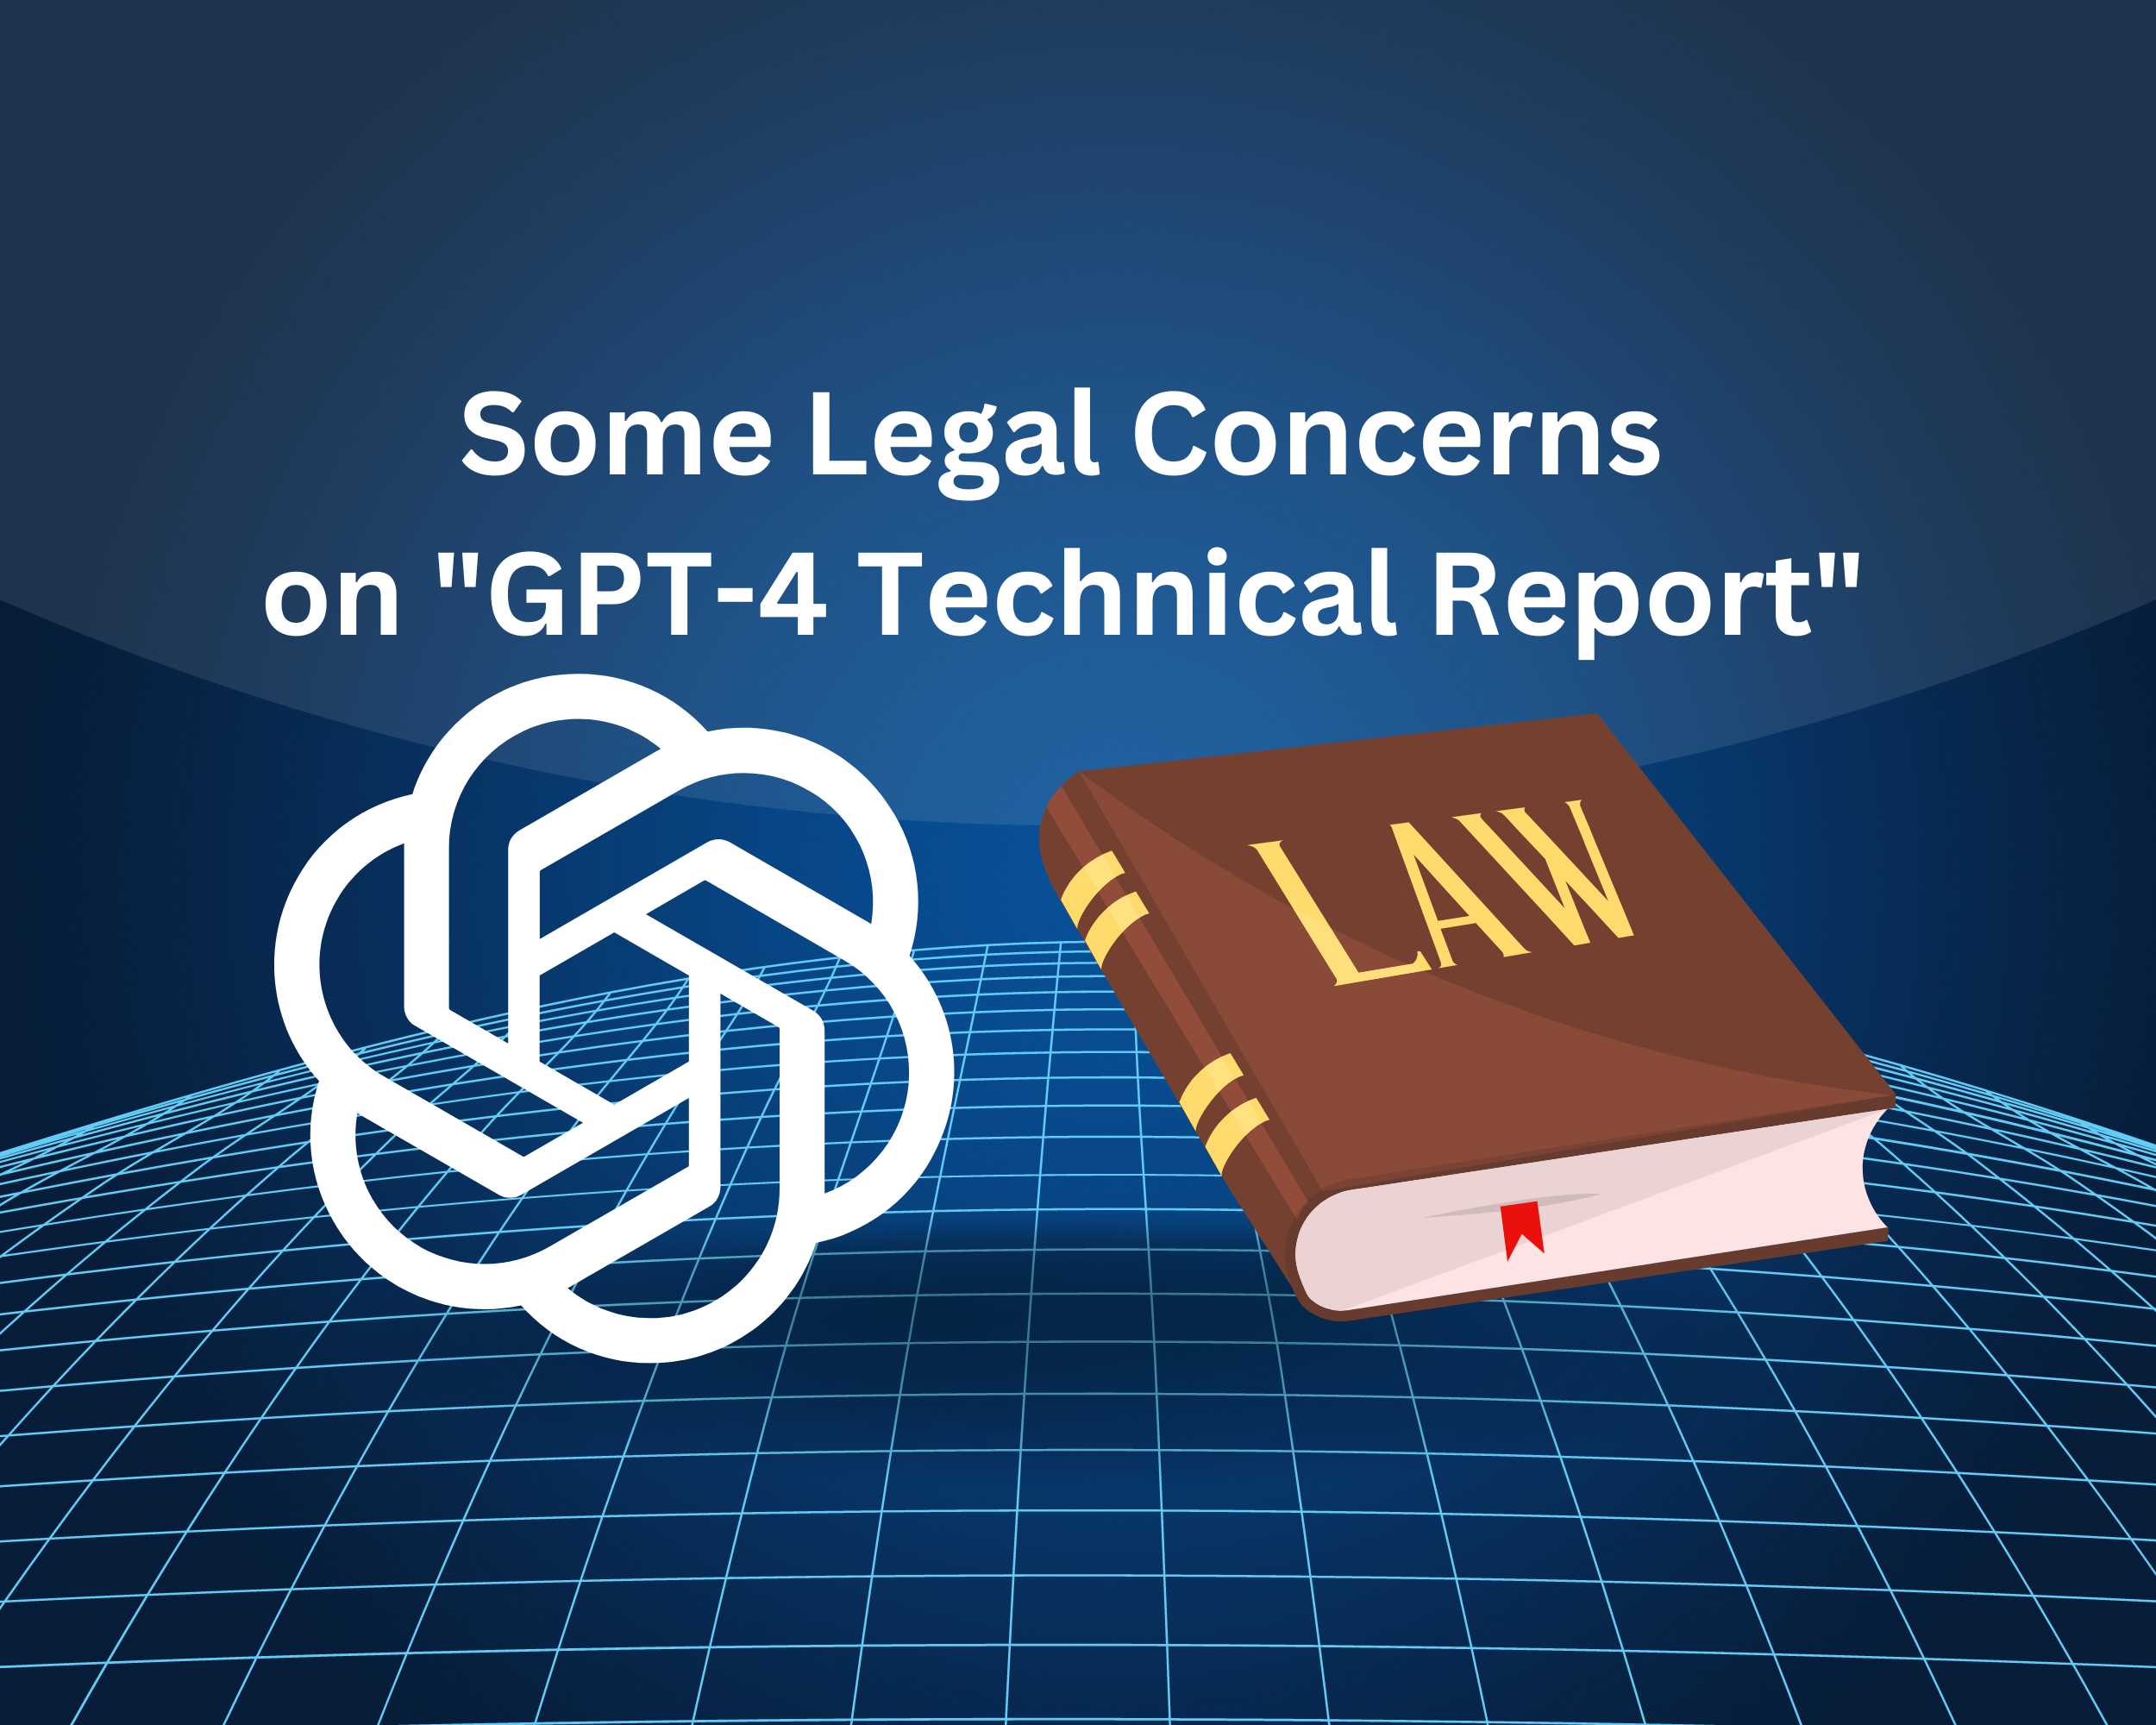 Some Legal Concerns on GPT-4 Technical Report